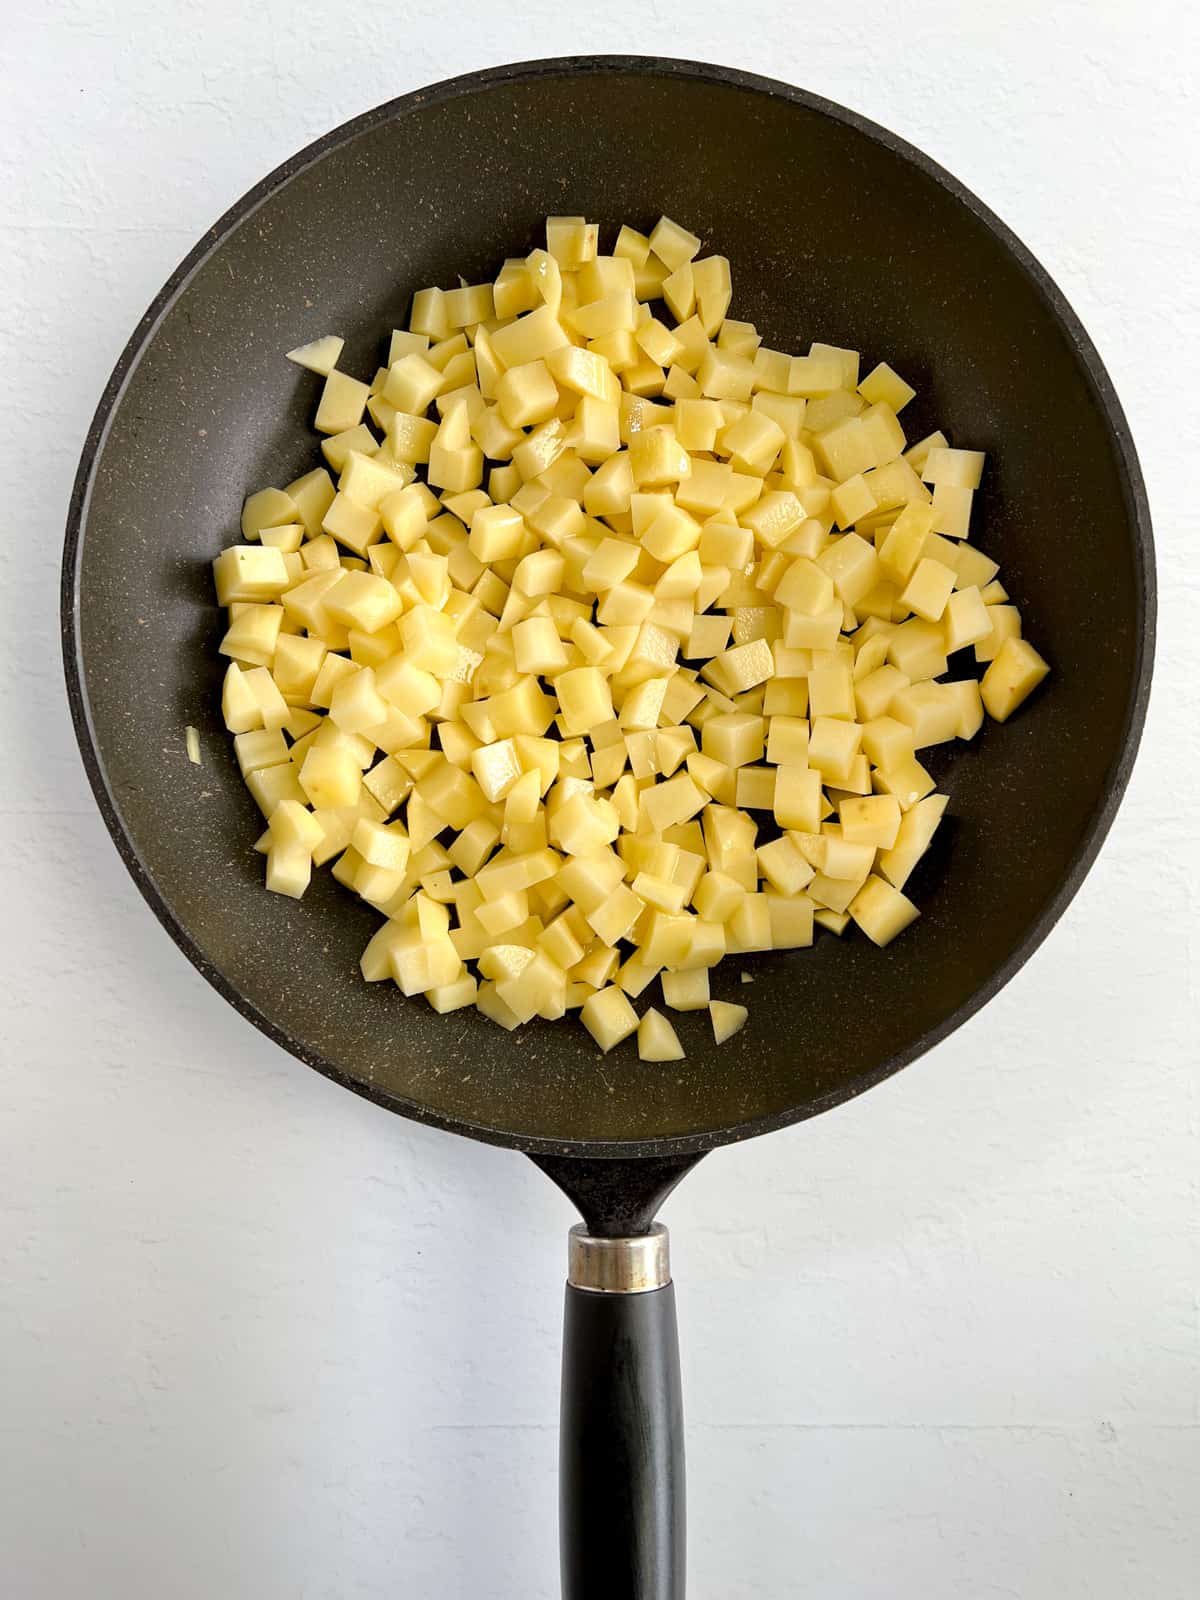 uncooked cubed potatoes in a black fry pan